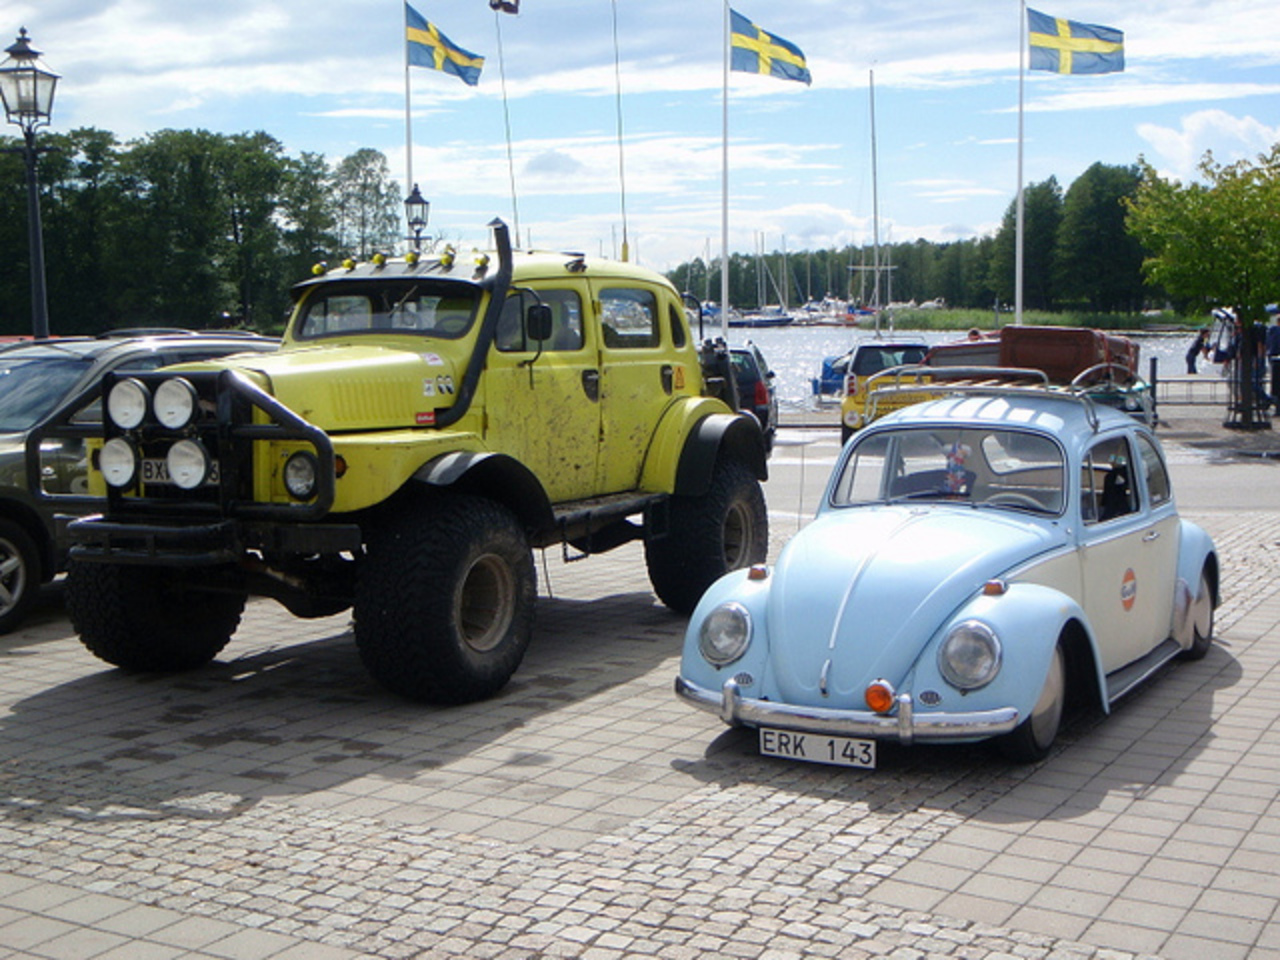 Volvo TP21 and one low VW Beetle | Flickr - Photo Sharing!